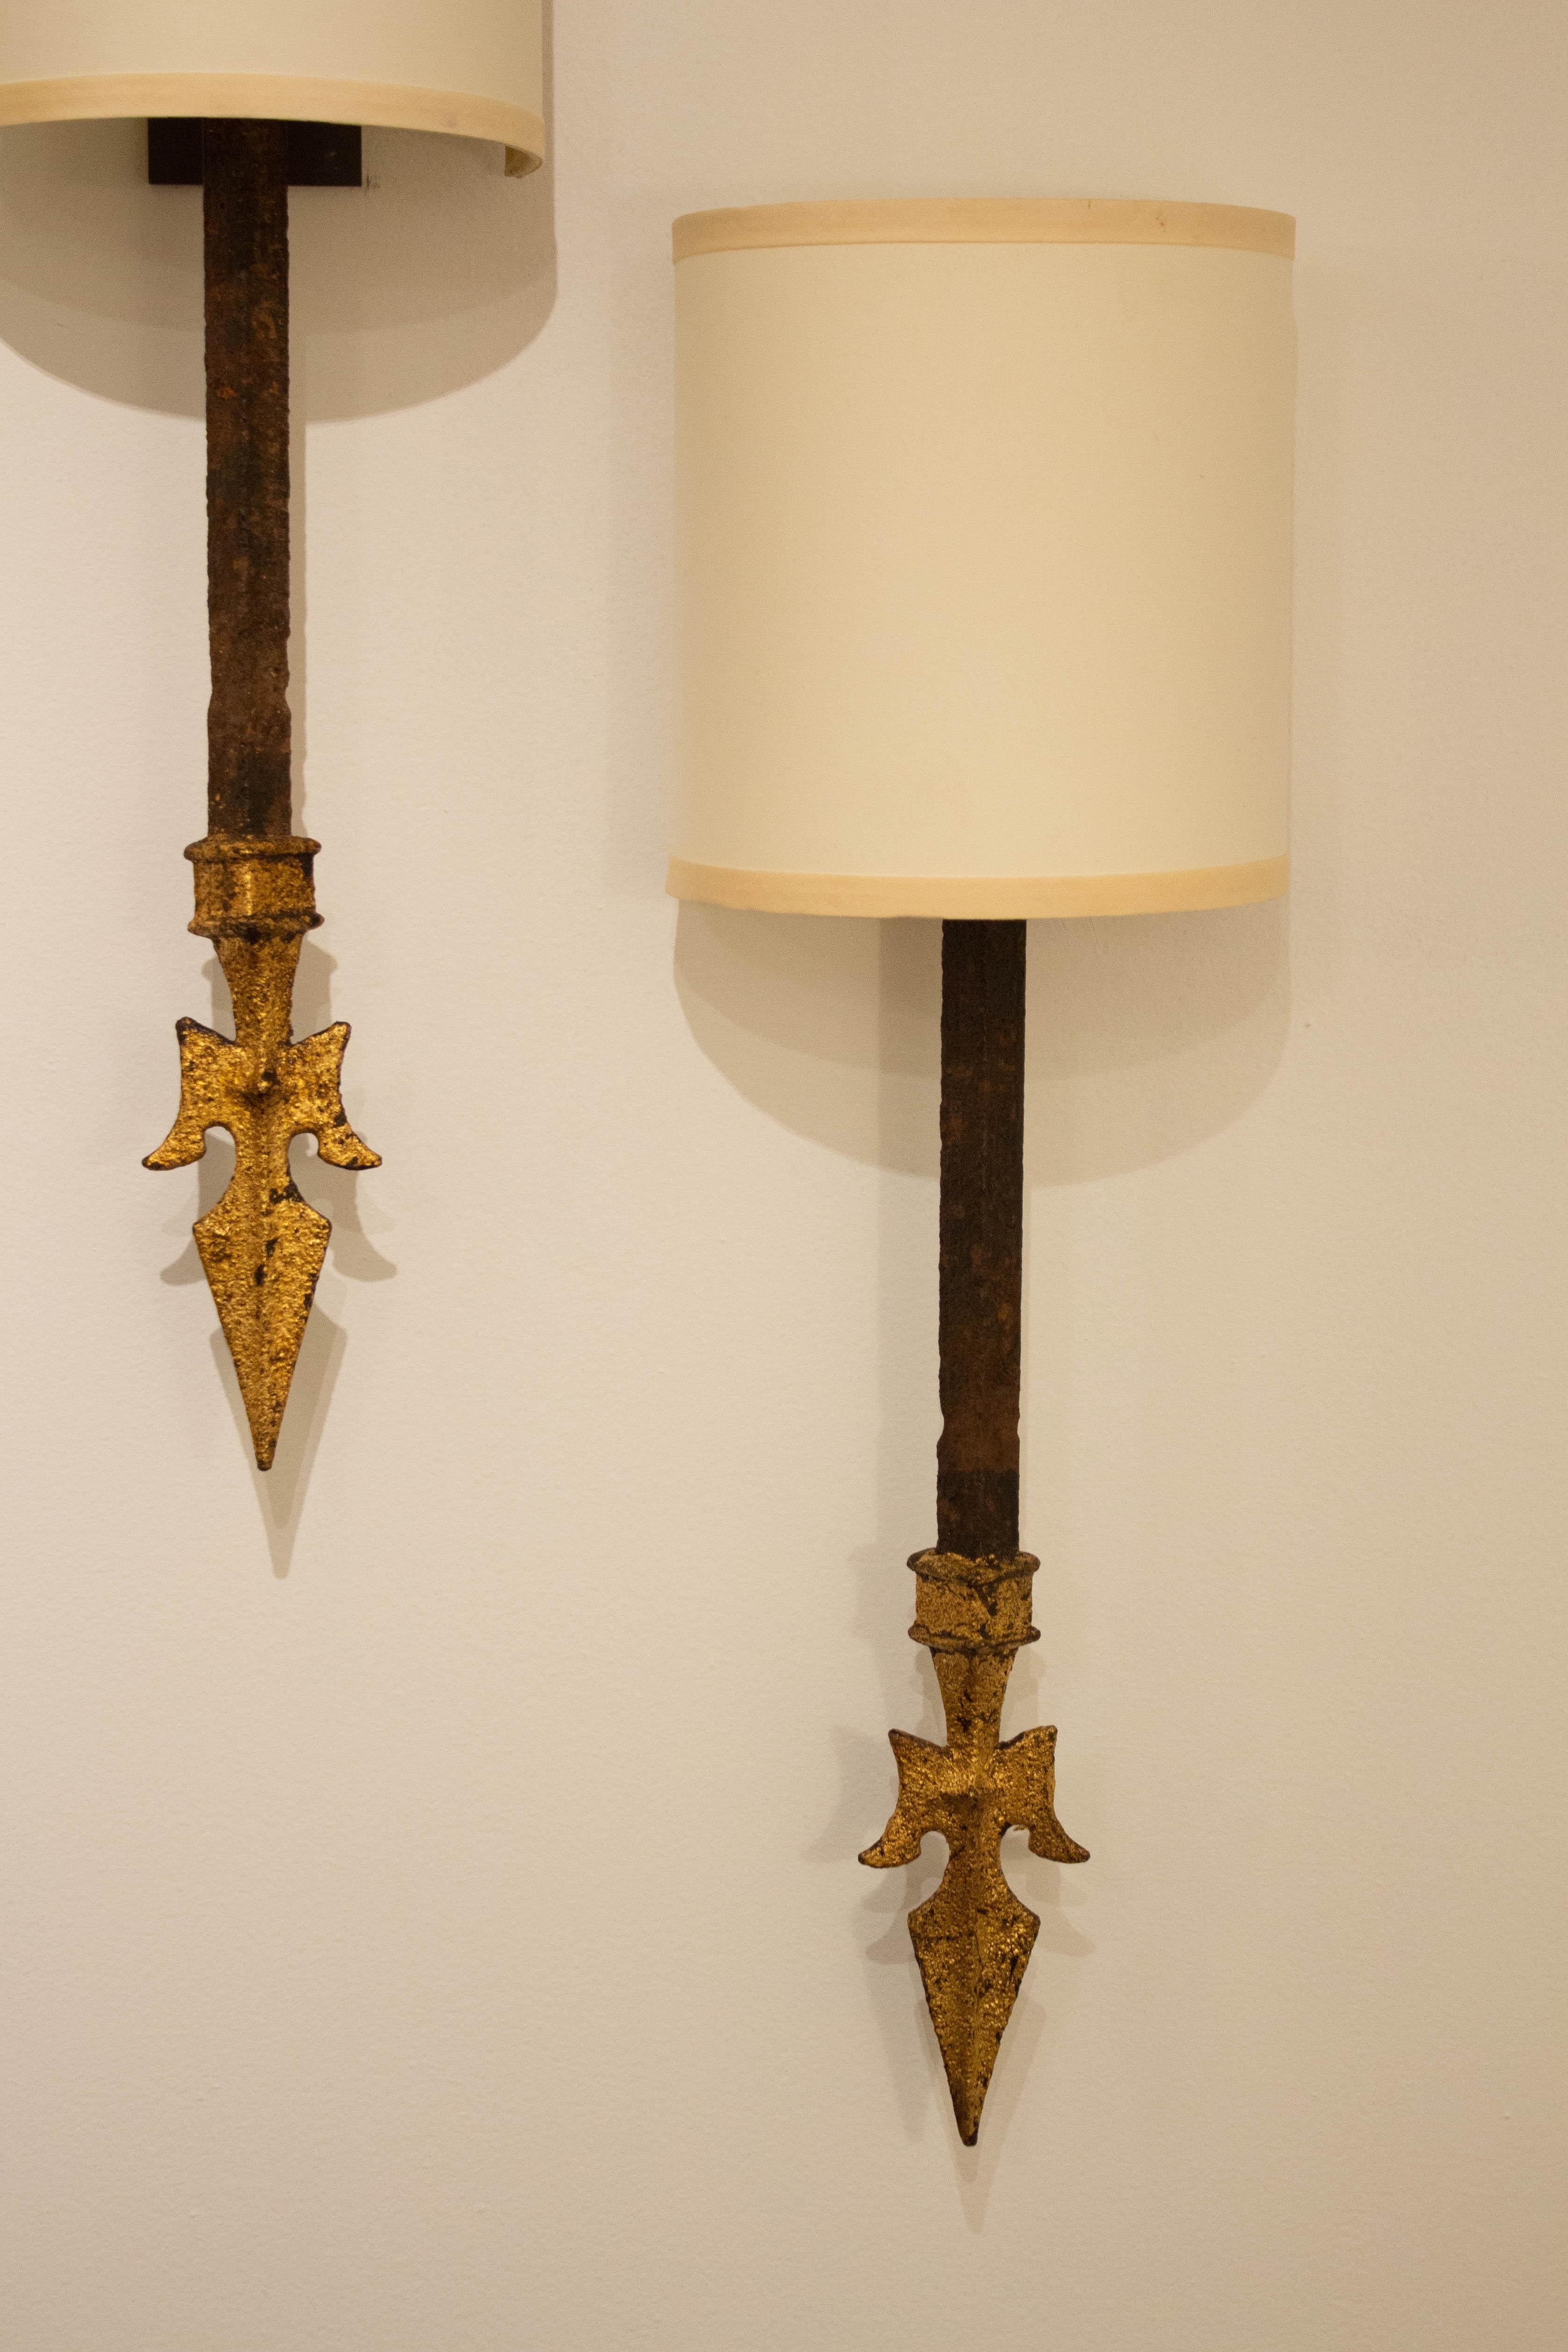 A pair of wrought iron wall sconces. Gold gilt spear point finials. Hardwired. Cream half shades included.